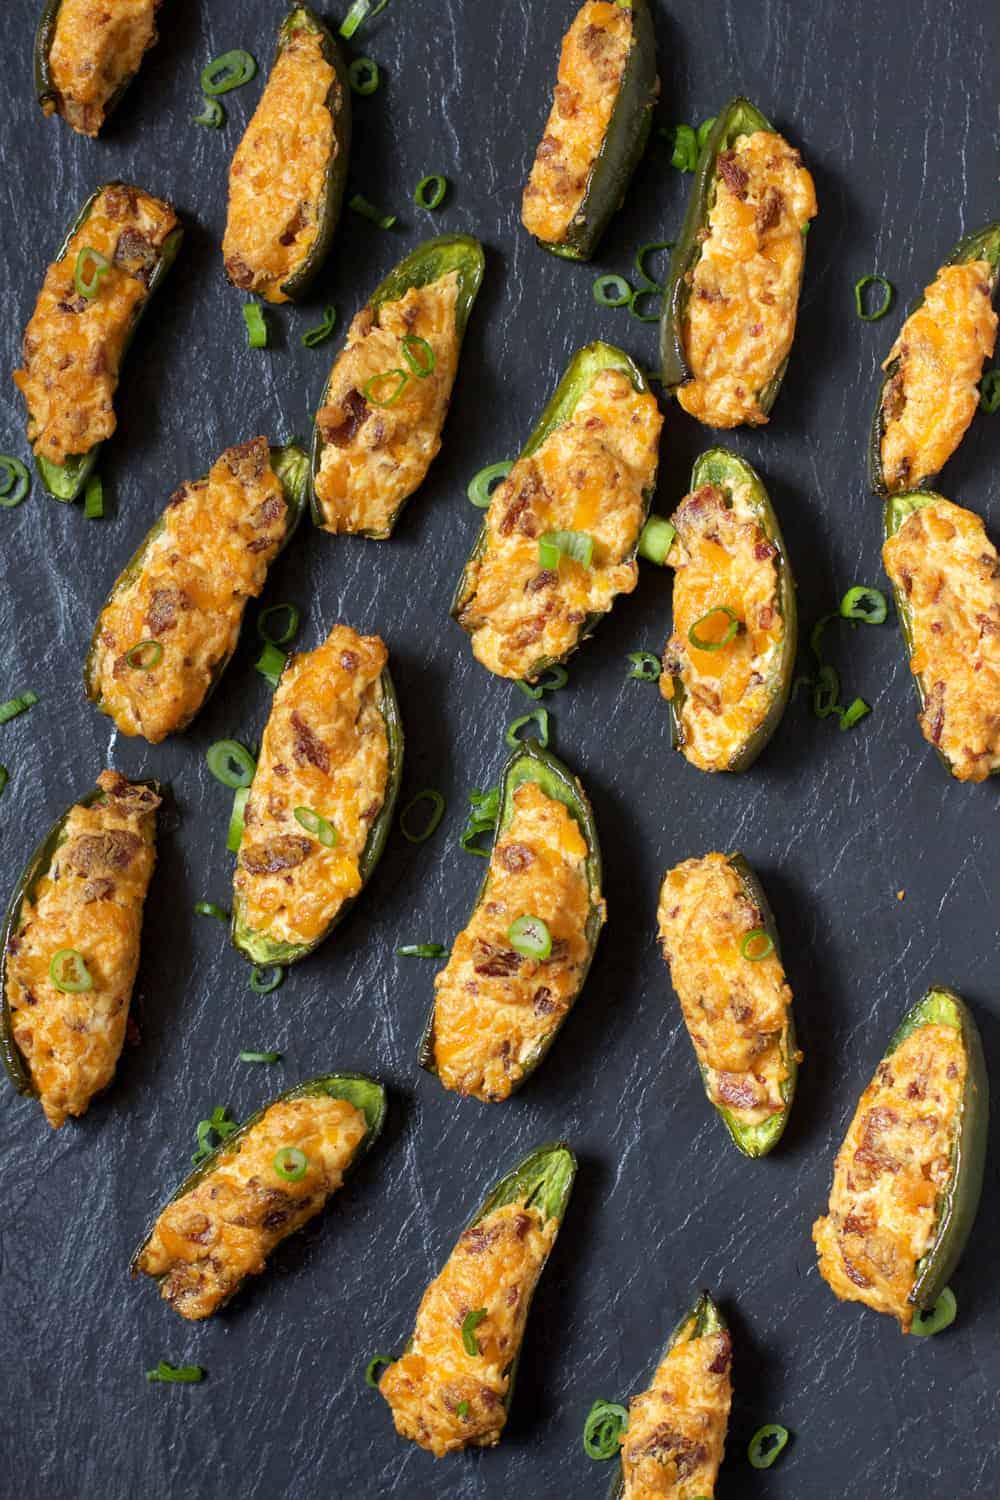 Smoked Jalapeño Poppers with Smoked Bacon are a great Super Bowl Recipe